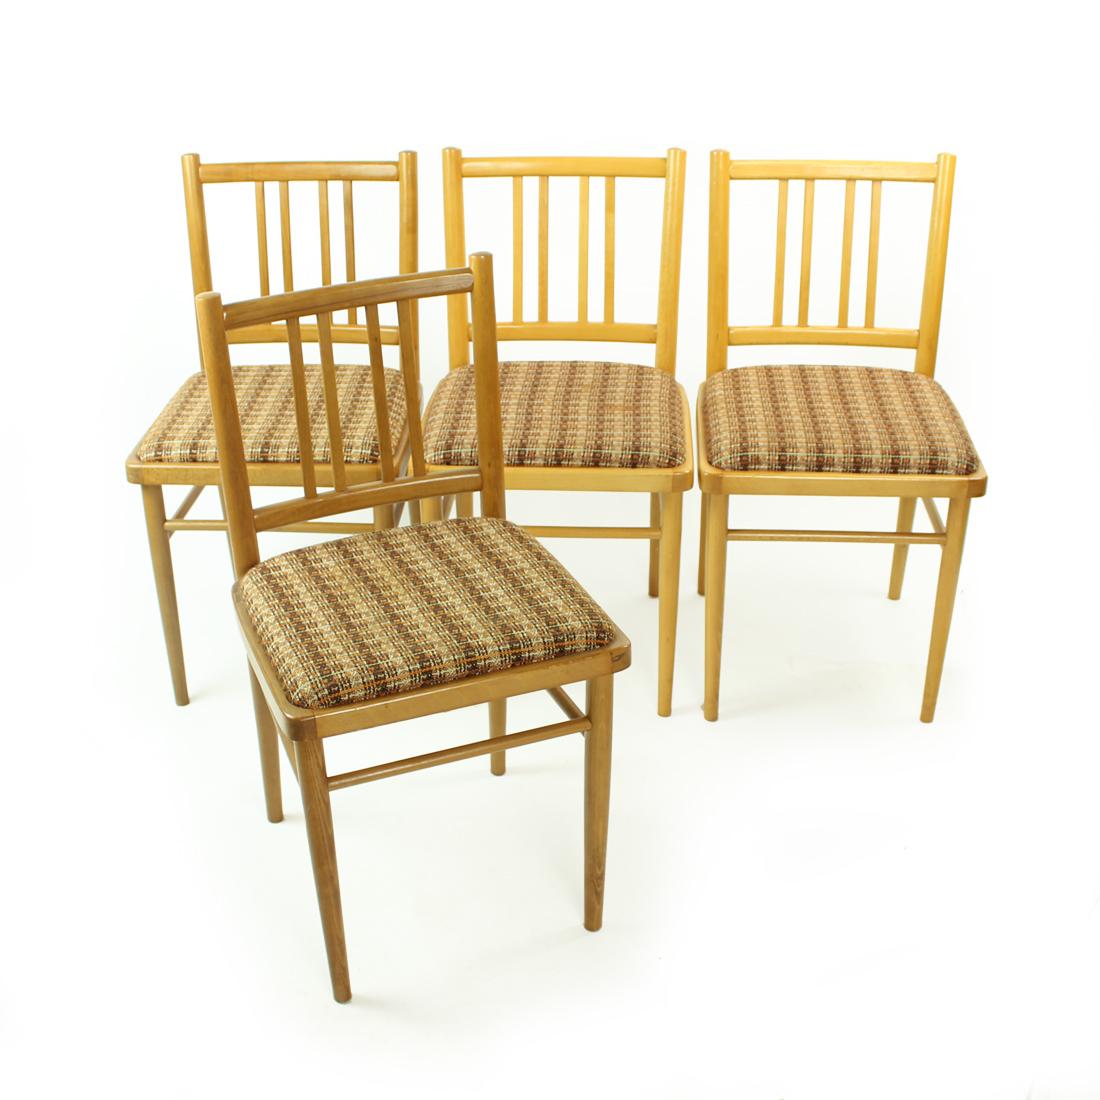 Midcentury Dining Chairs In Oak And Fabric, Ton Czechoslovakia, Set Of 4 For Sale 6